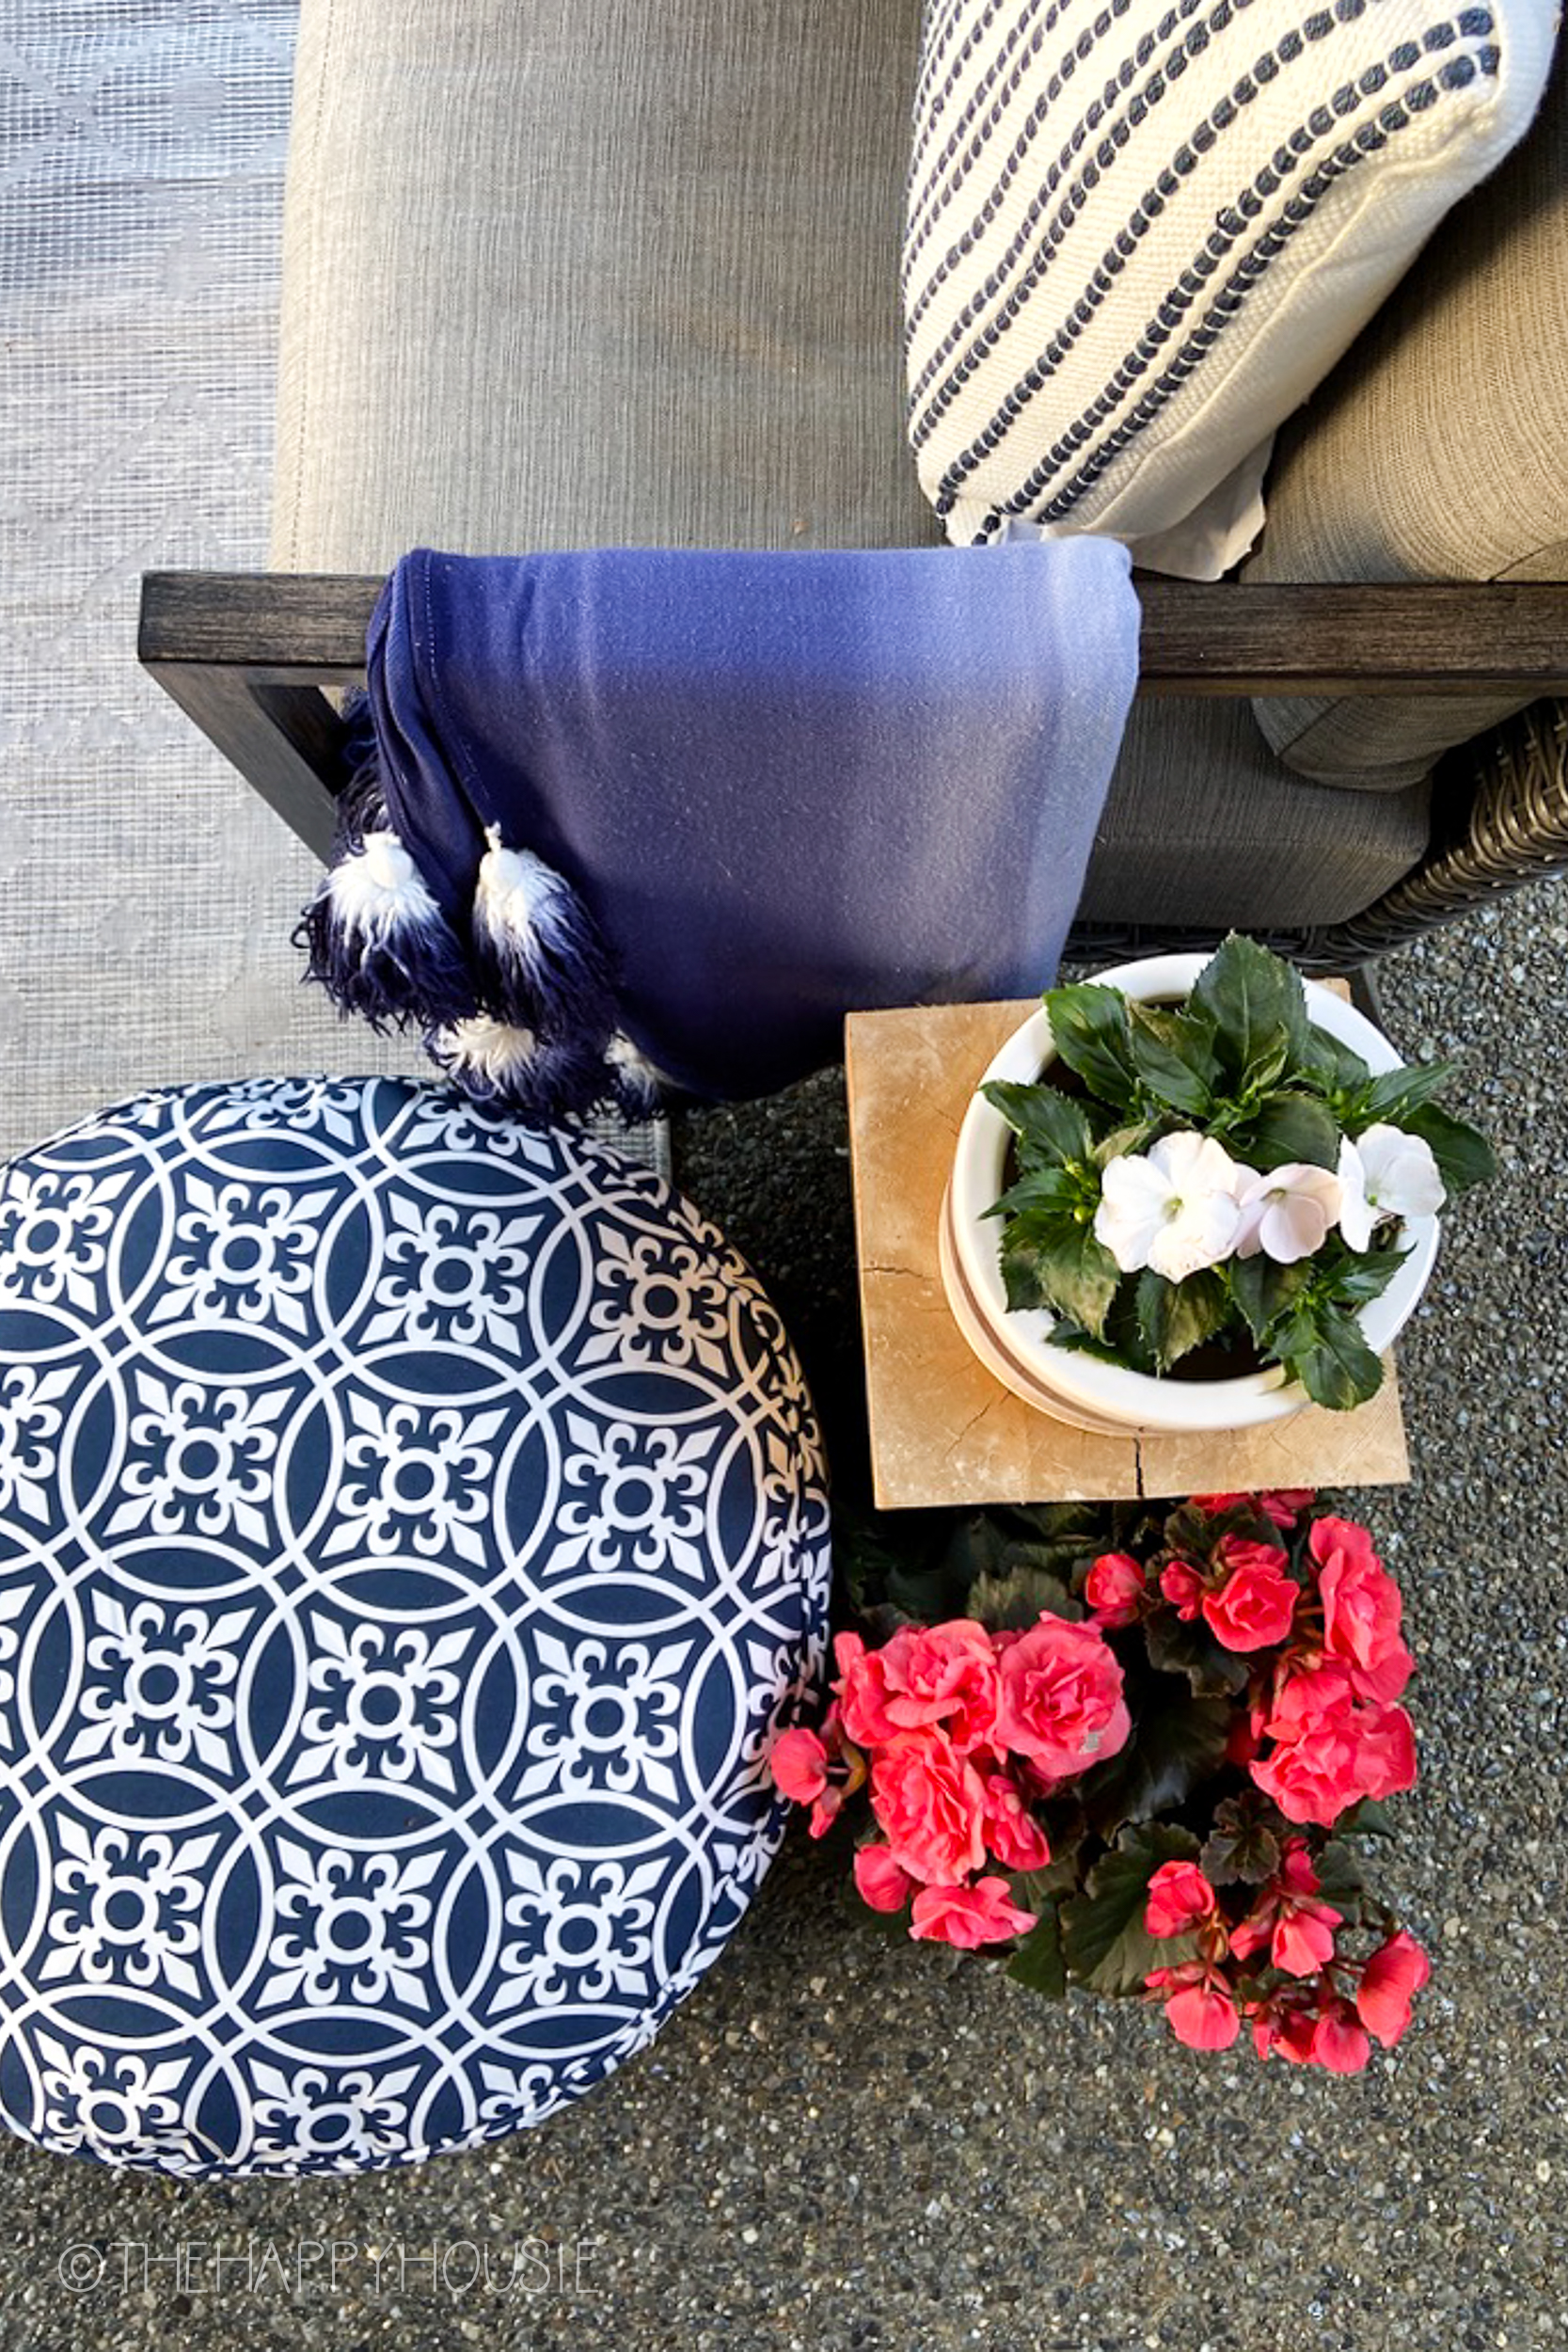 There is a blue and white pouf and a blue and white throw blanket.